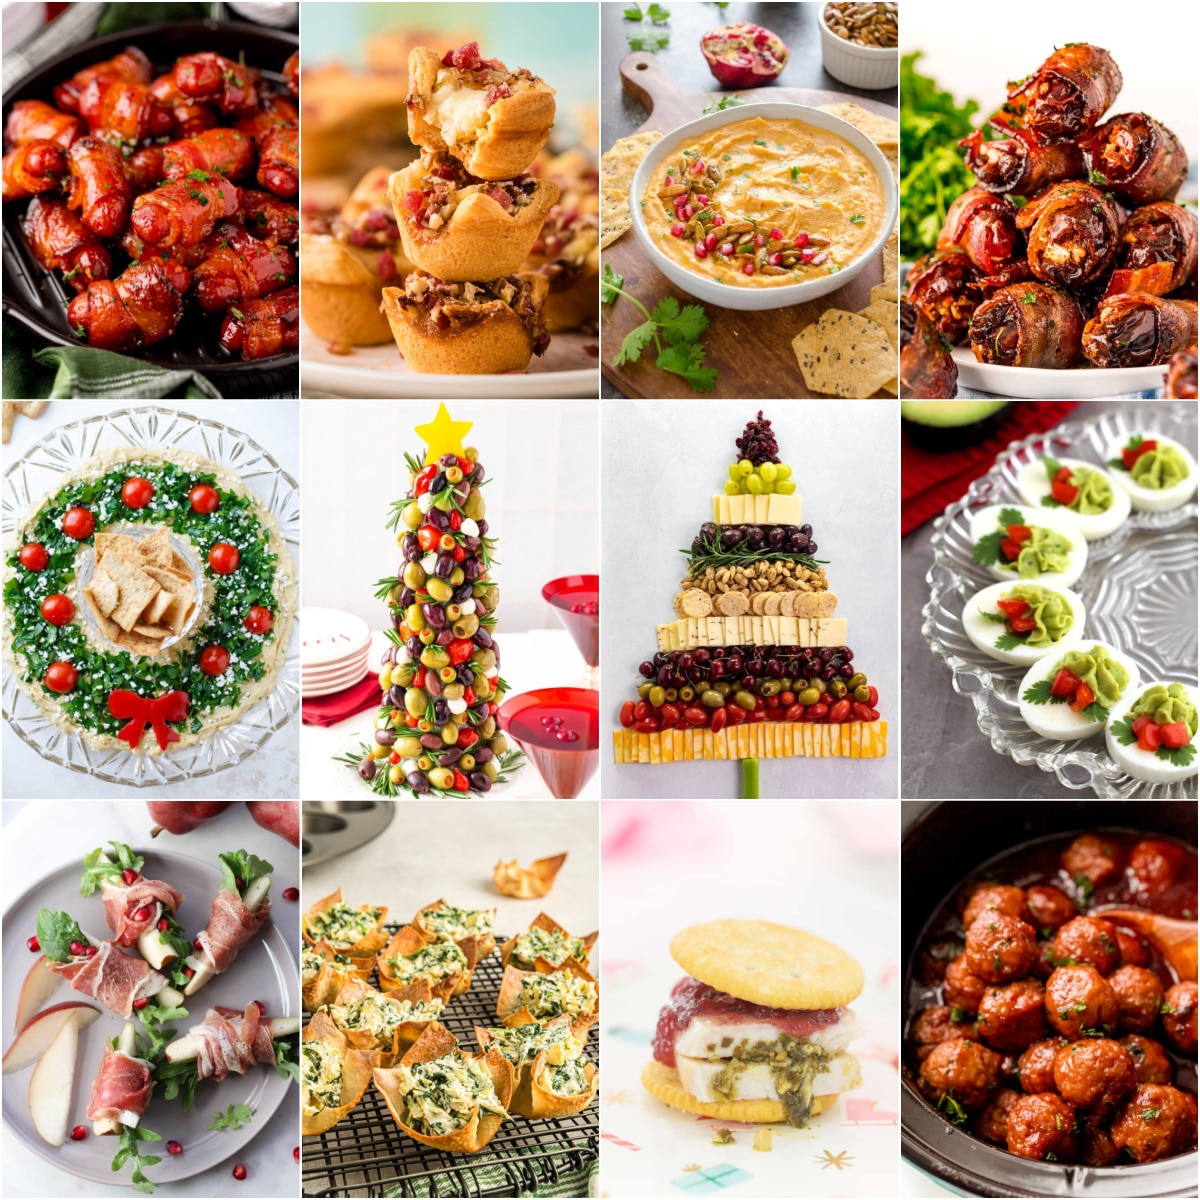 https://www.playpartyplan.com/wp-content/uploads/2020/12/christmas-appetizers-facebook-square.jpg